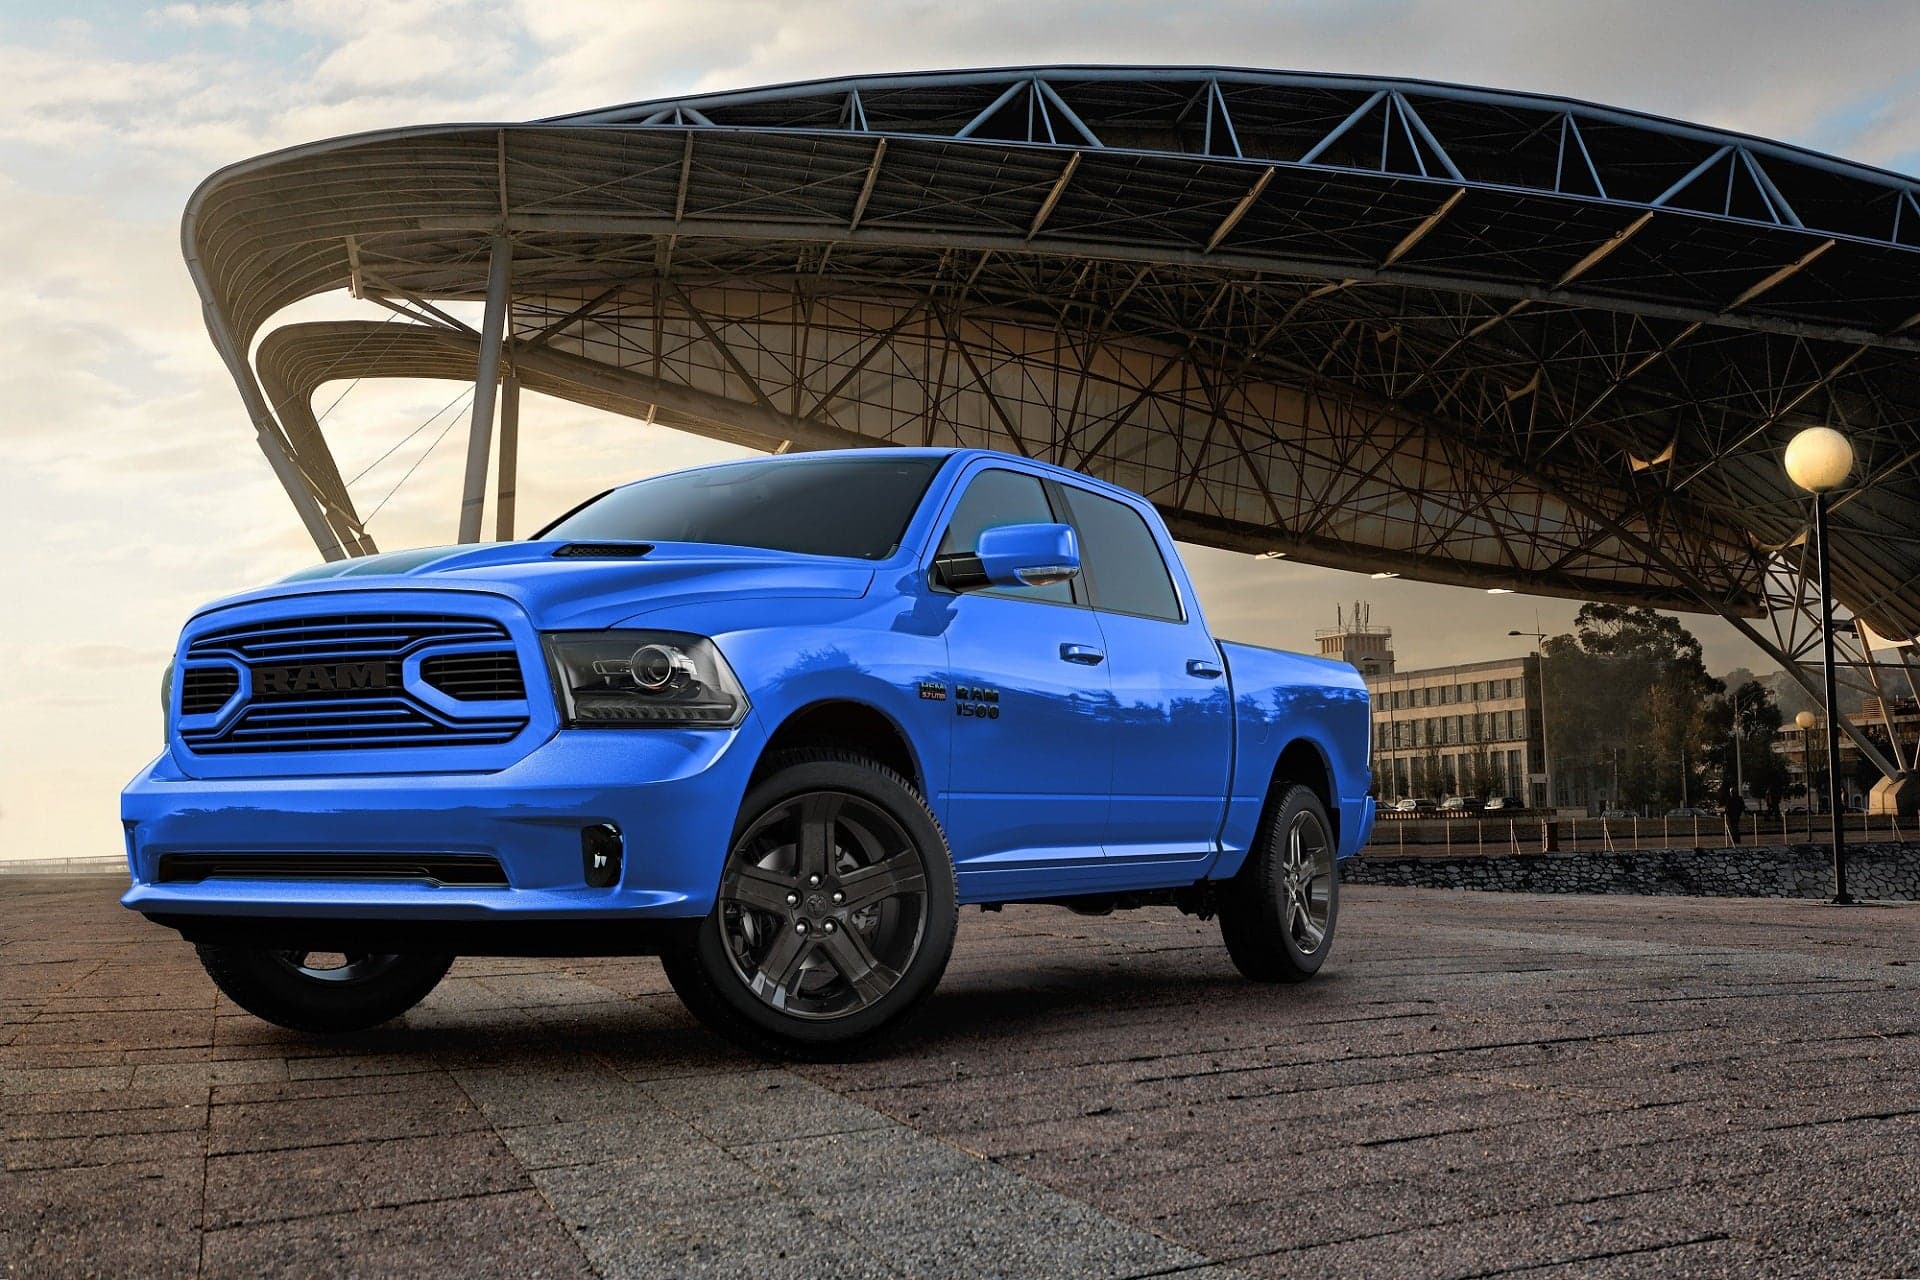 Hydro Blue Ram 1500, the Latest Special-Edition Truck